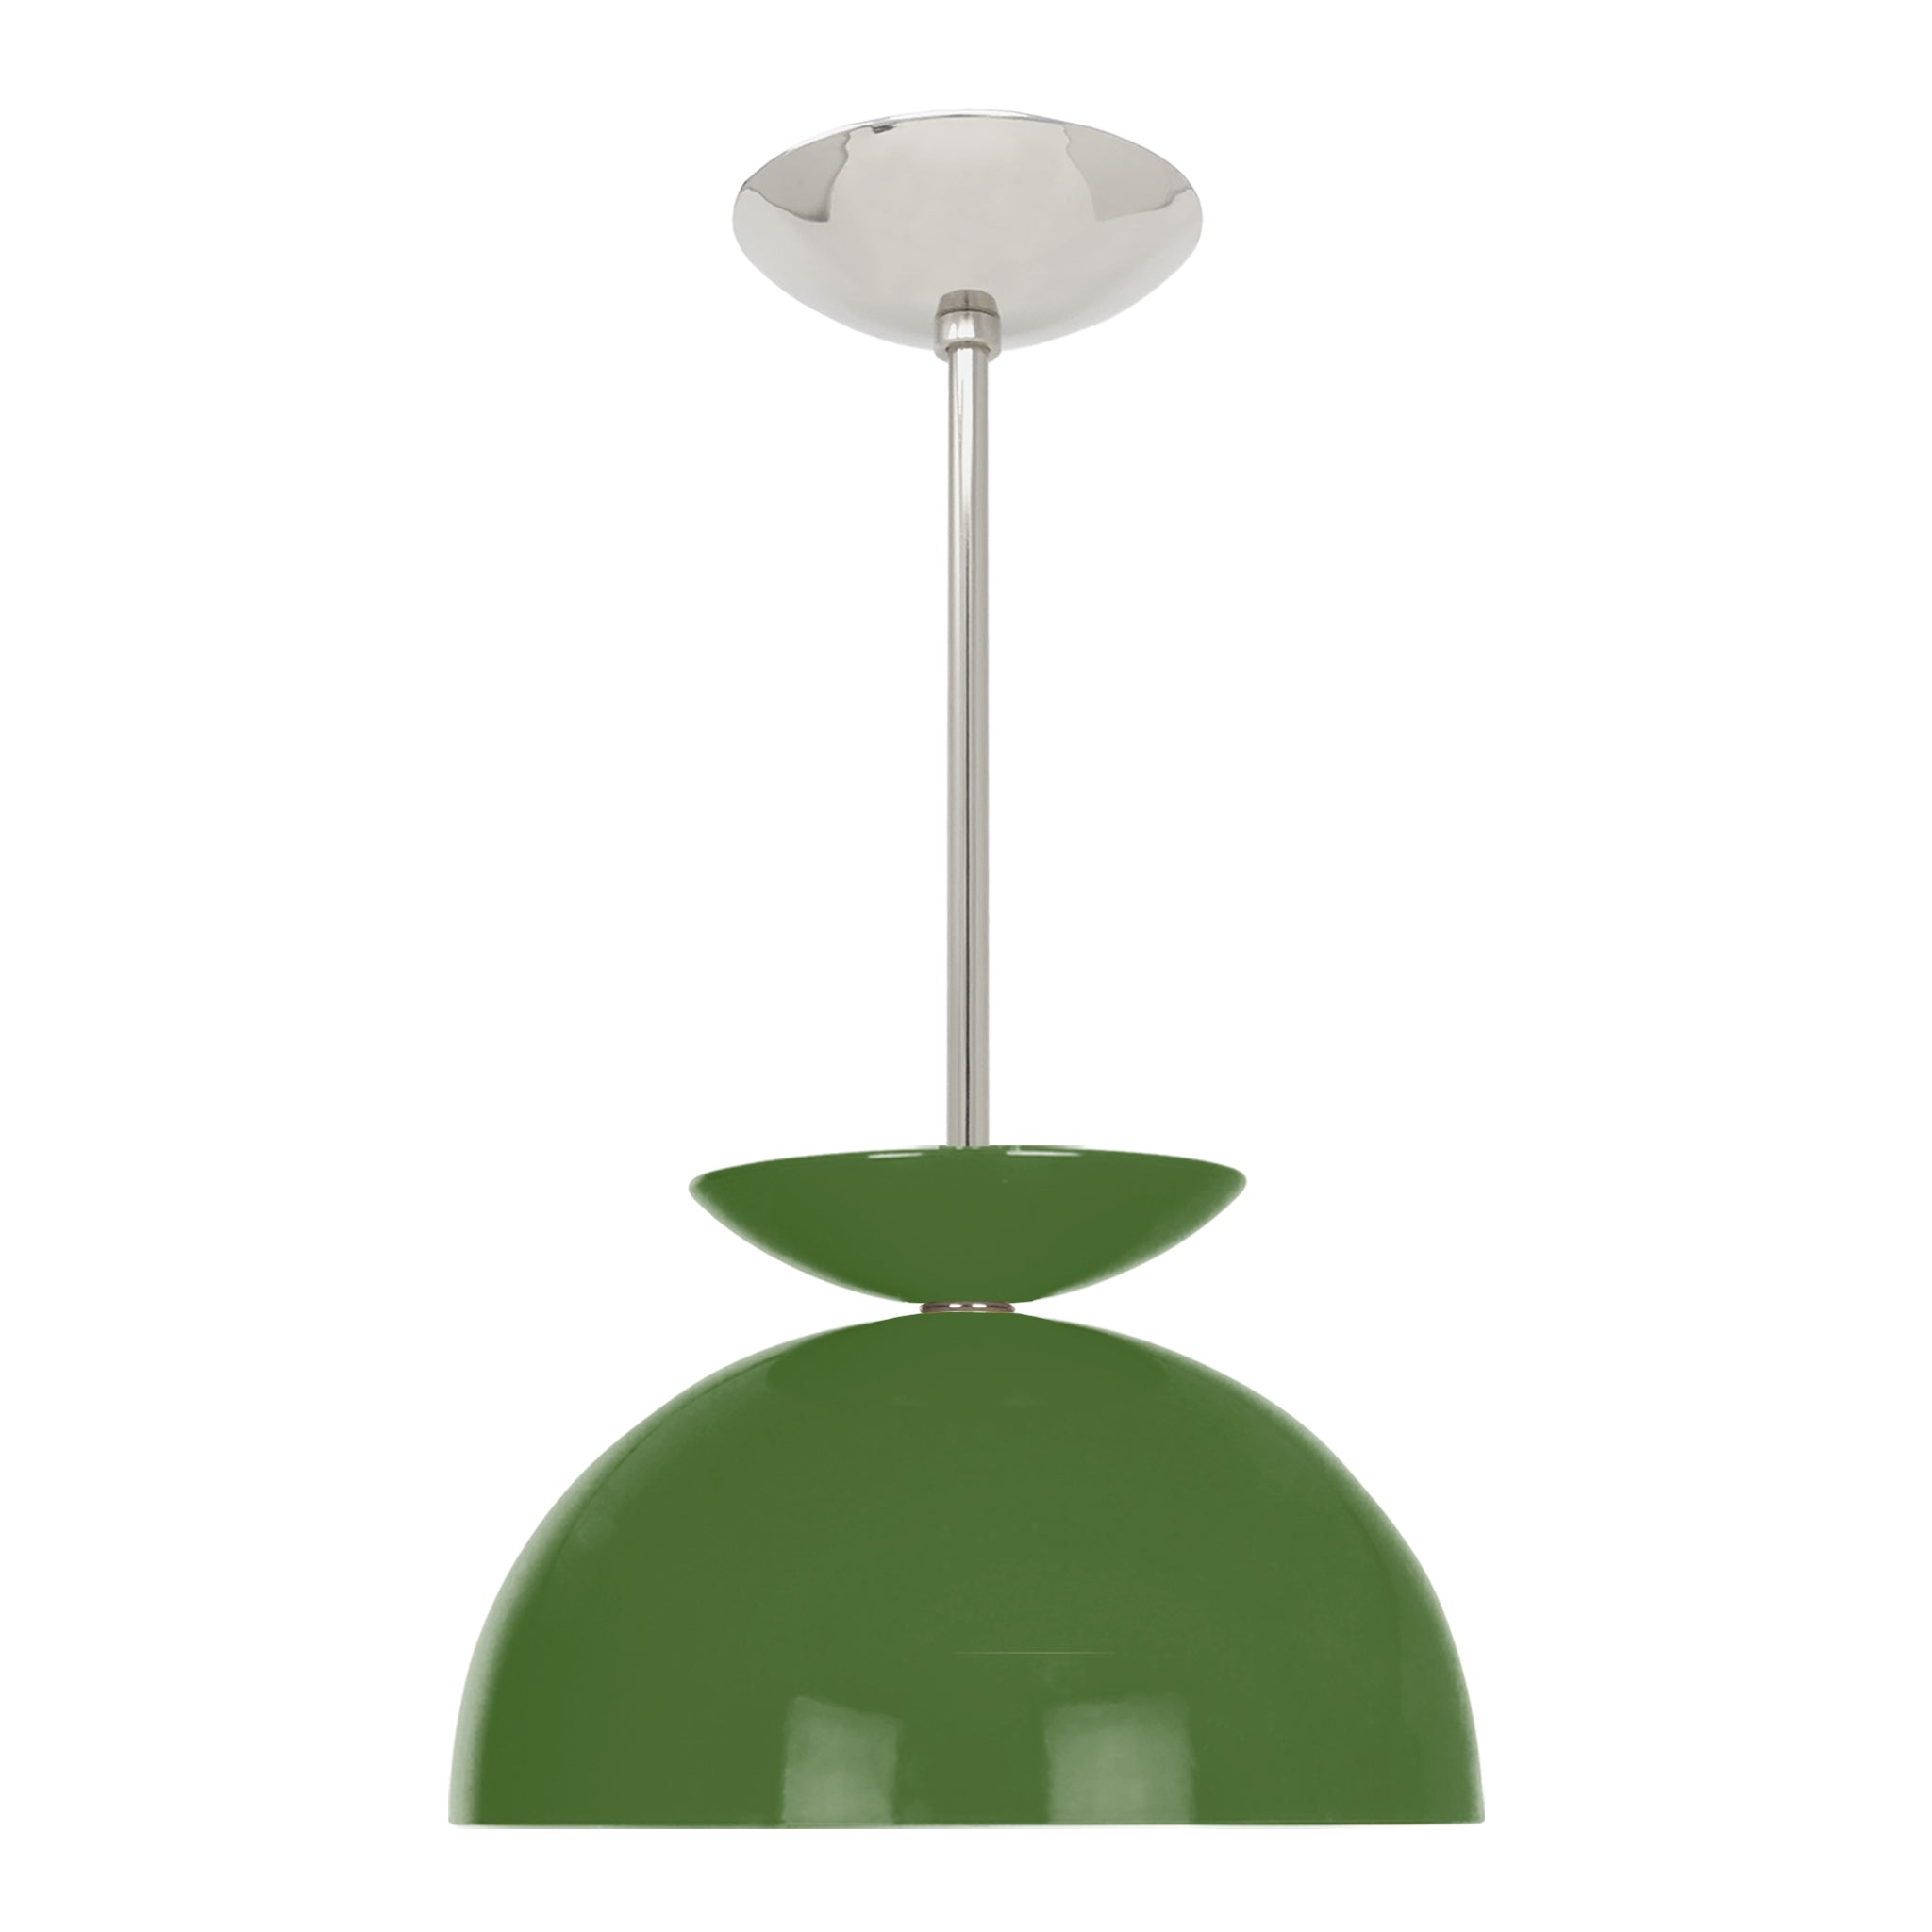 Nickel and python green color Echo pendant 12" Dutton Brown lighting